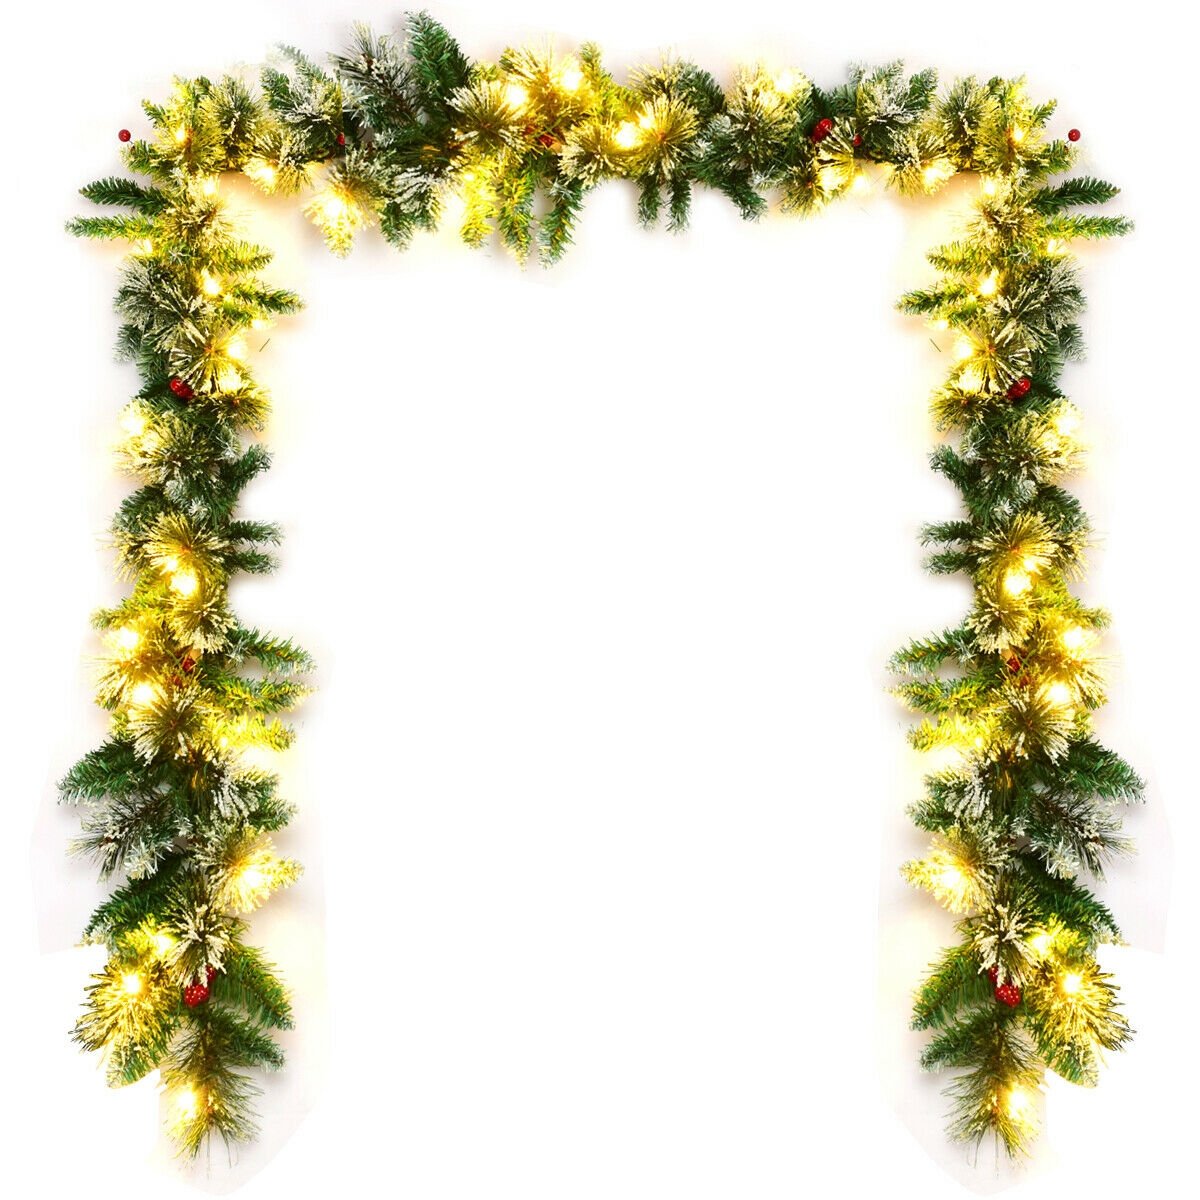 9 Feet Pre-lit Snow Flocked Tips Christmas Garland with Red Berries-Boyel Living